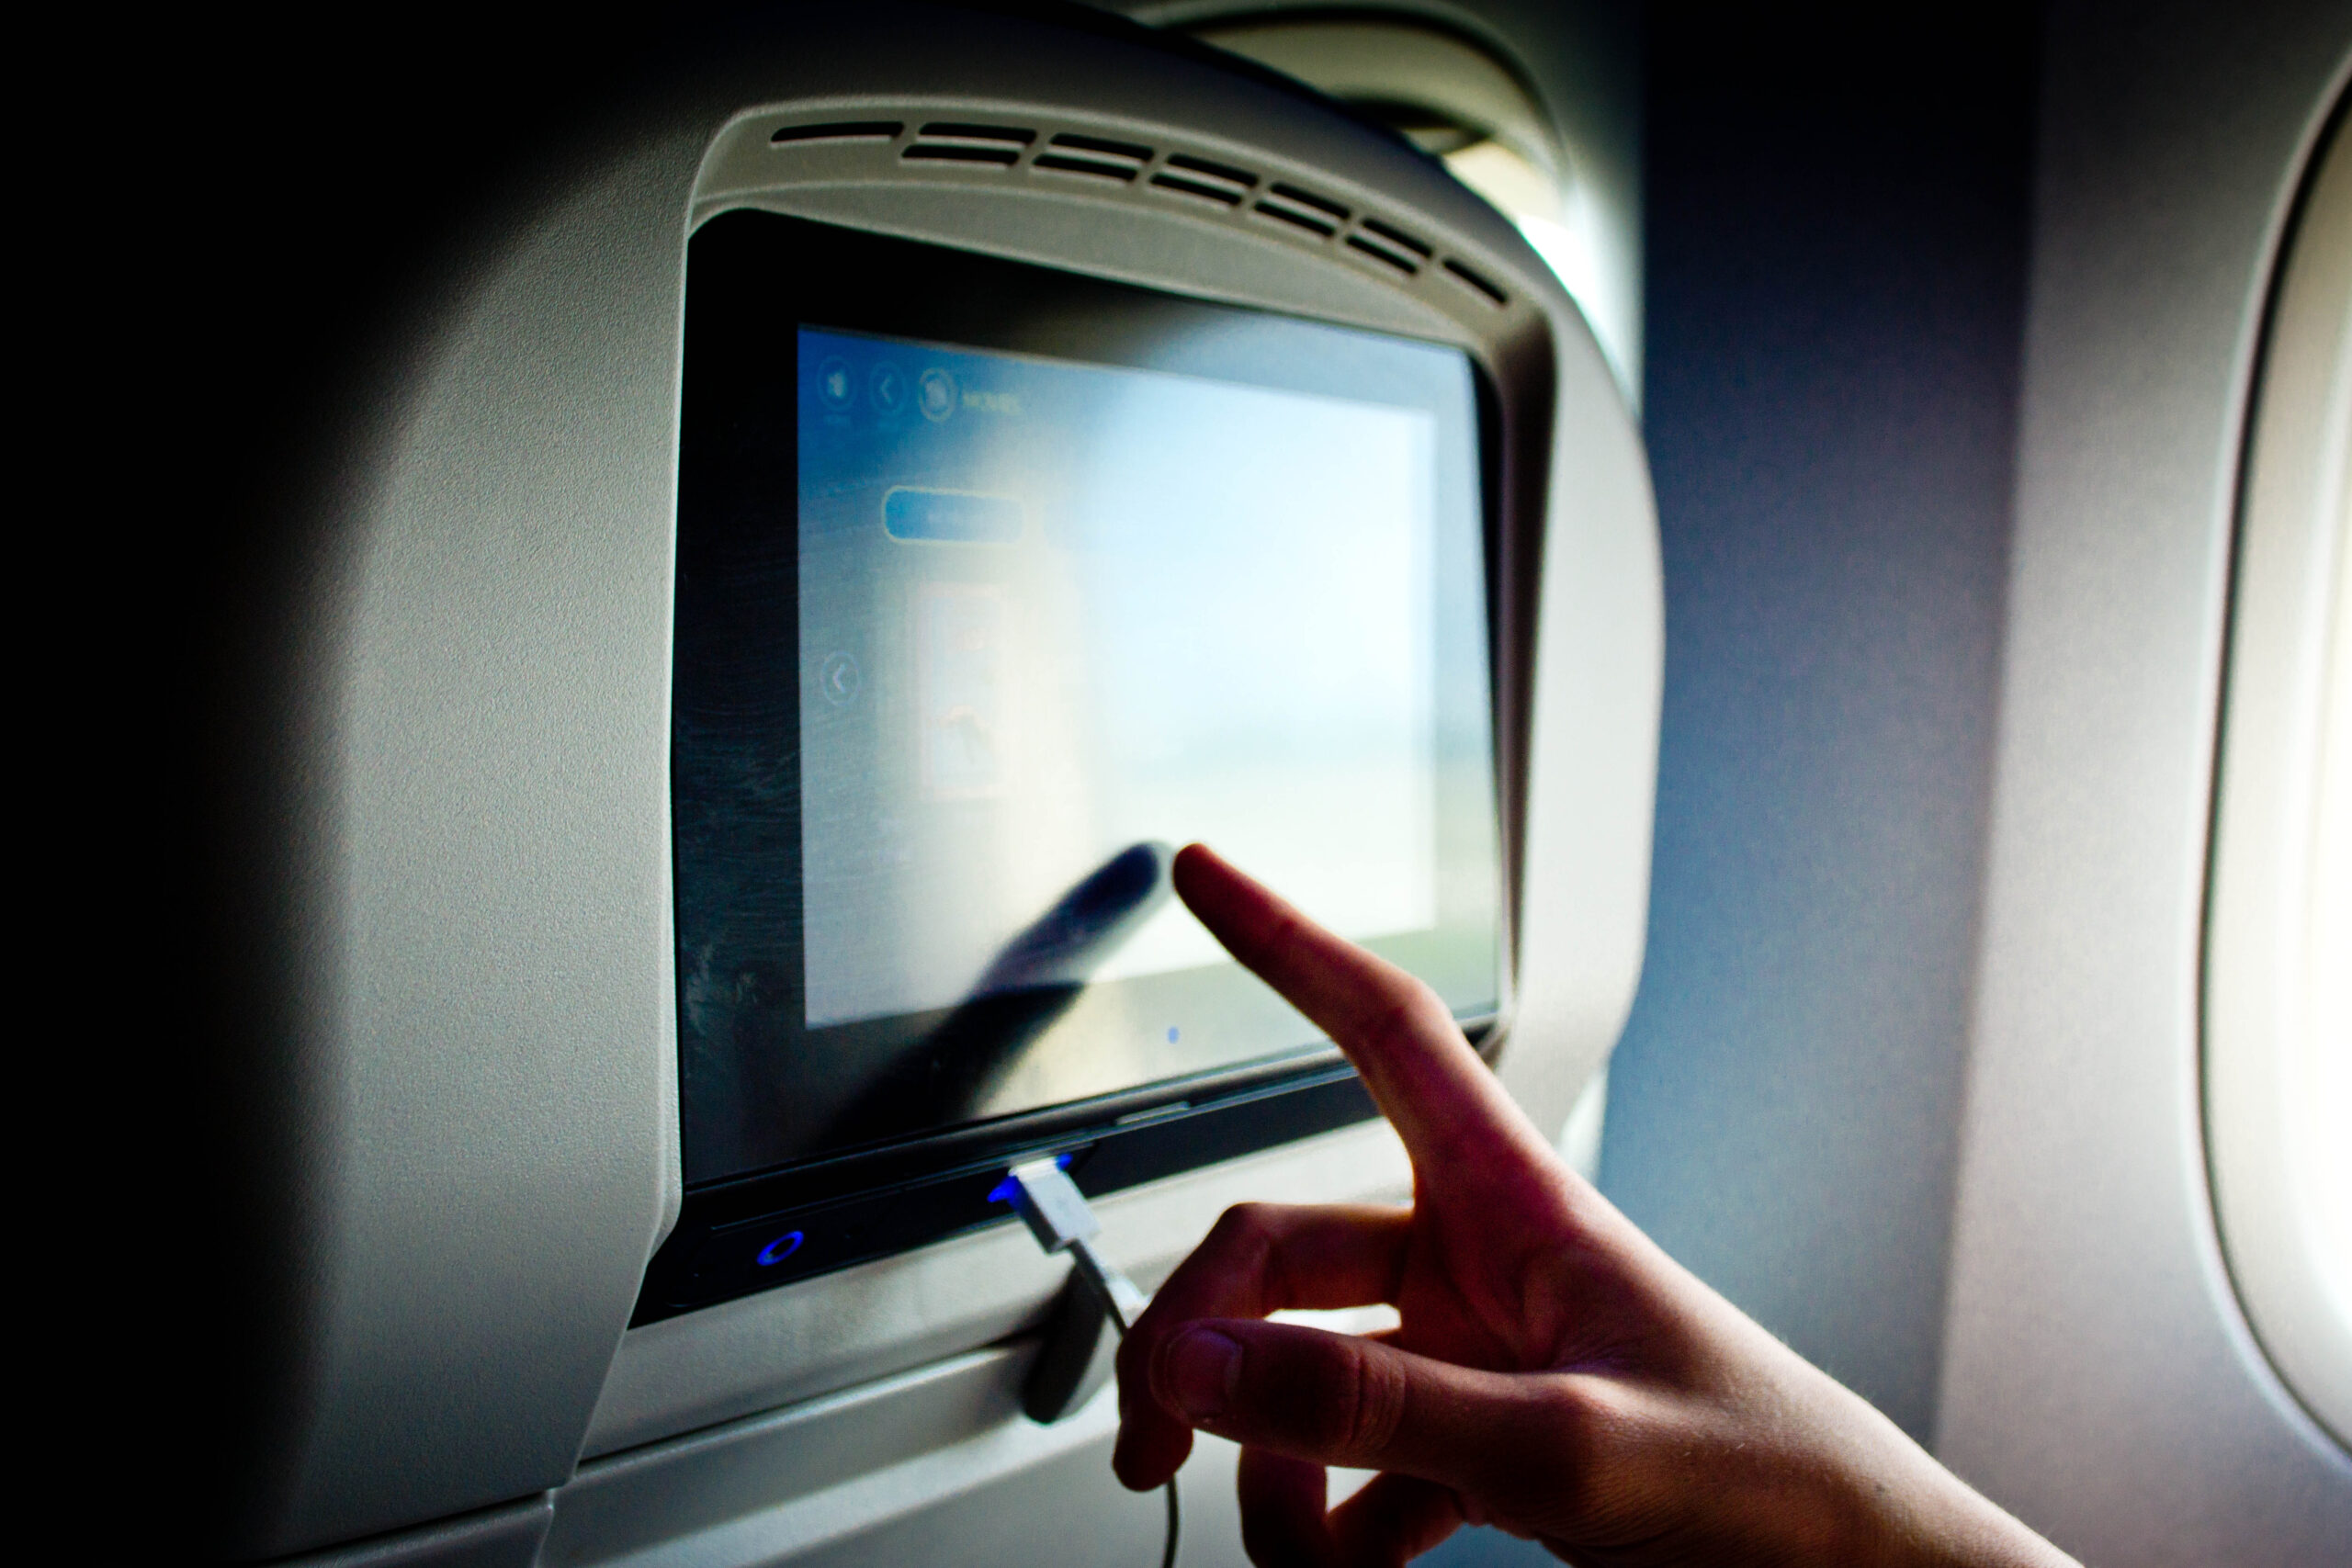 Airlines tailored inflight advertising solutions